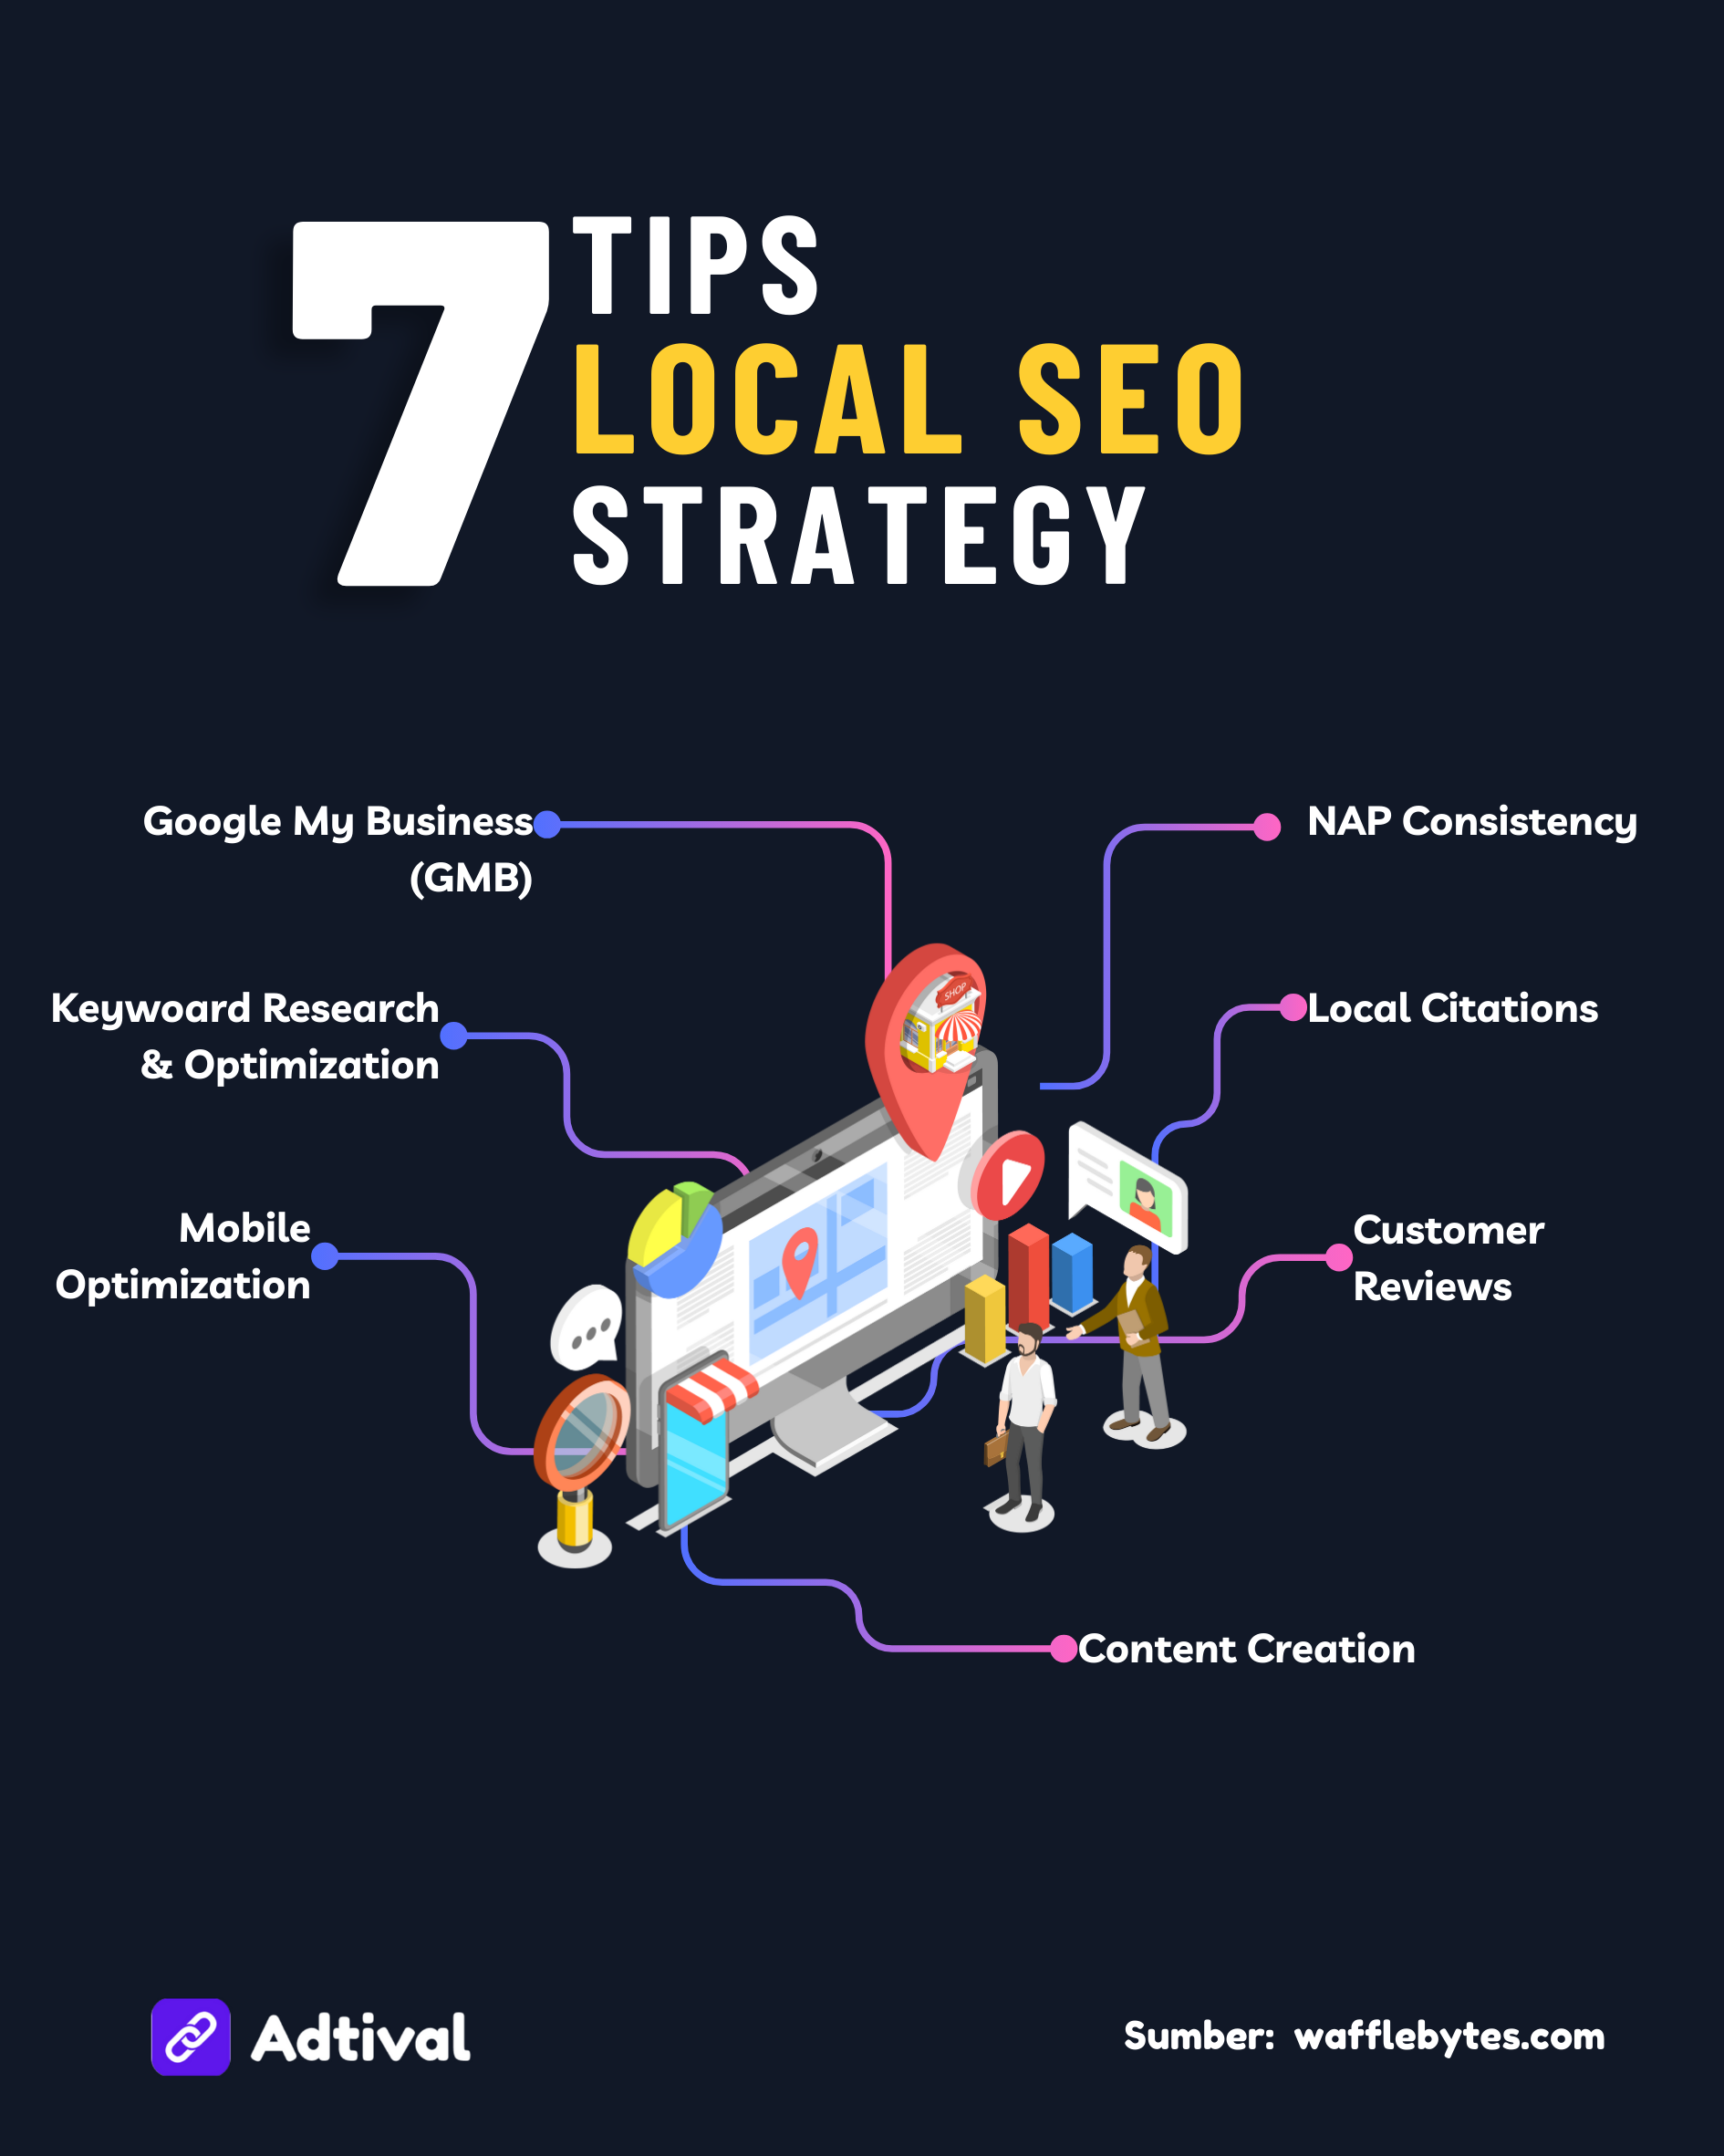 7 Tips Local SEO Strategy